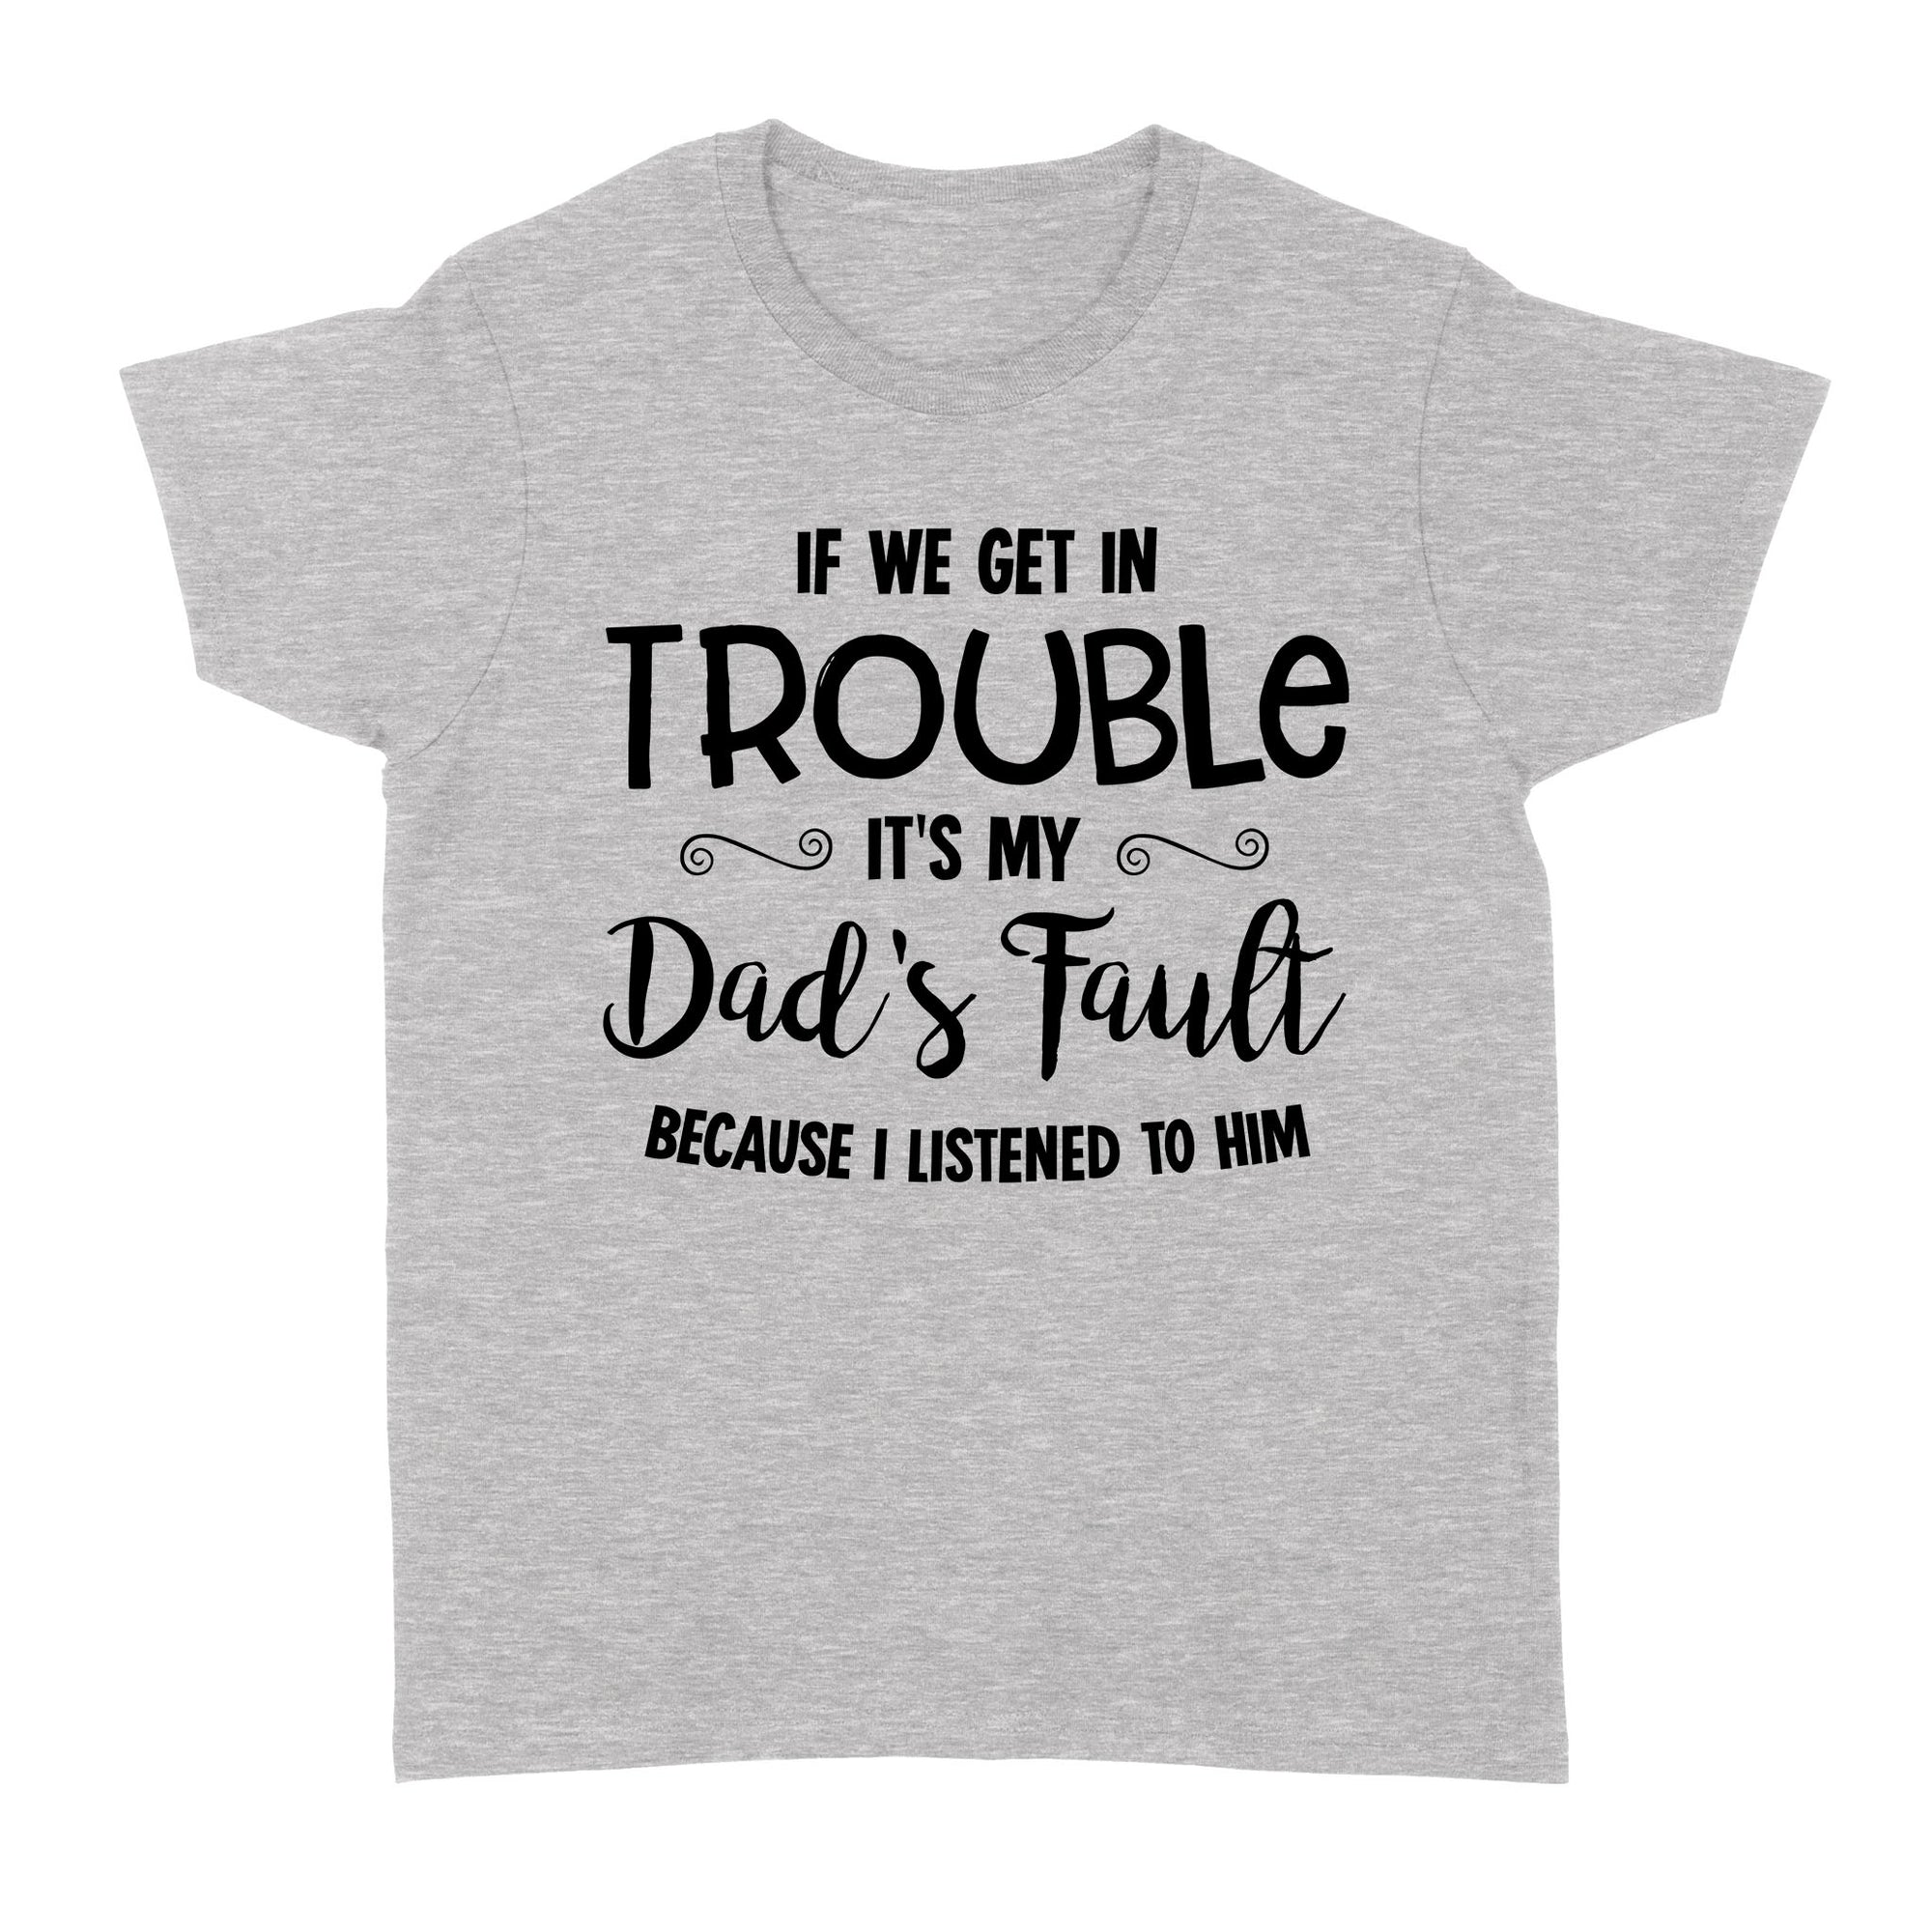 If We Get In Trouble It Is My Dad s Fault Because I Listened To Him Funny Gift Ideas for Daughter from Dad Standard Women's T-shirt